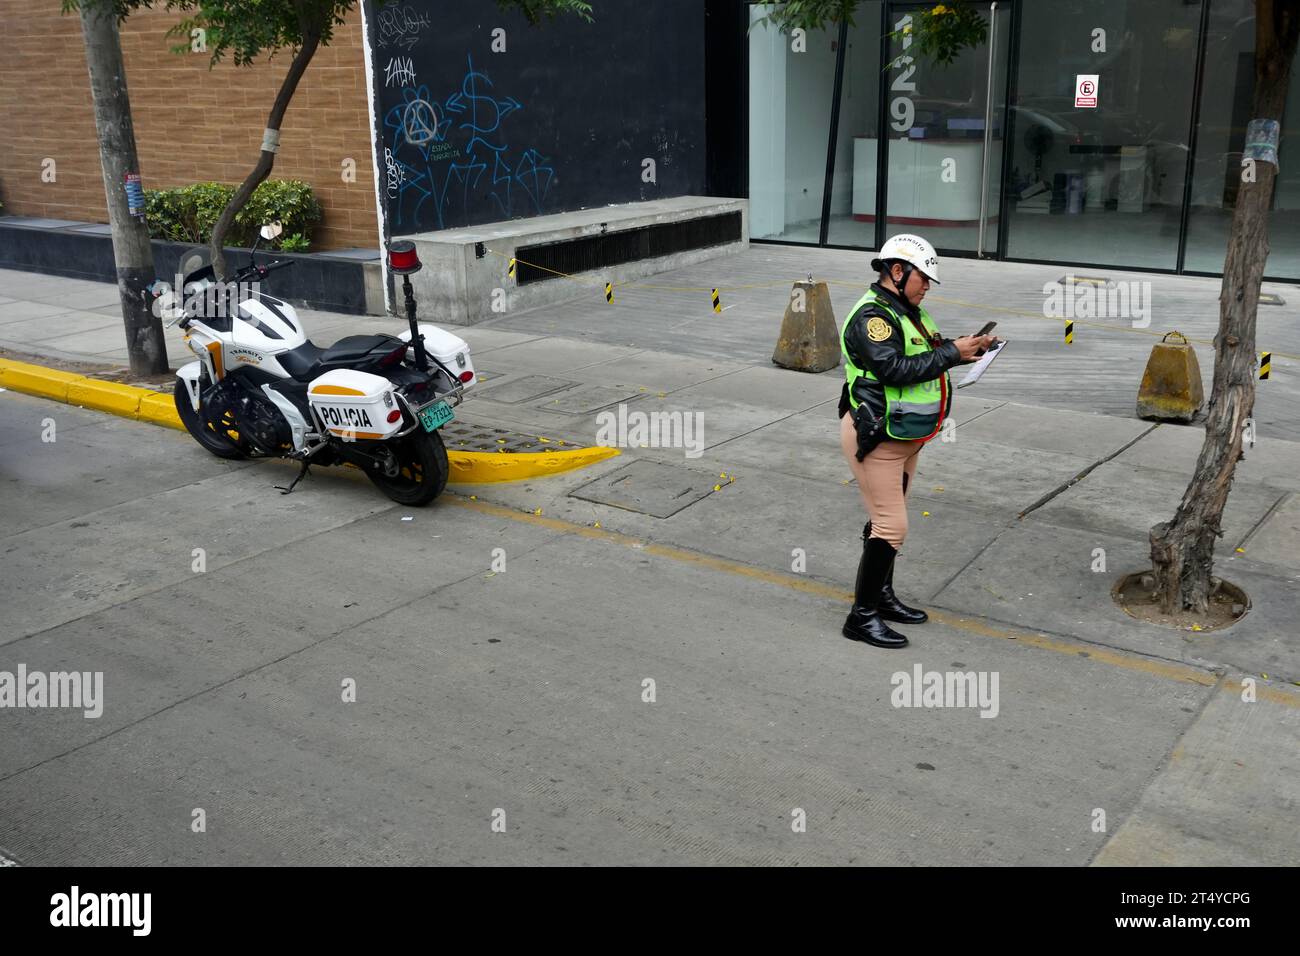 Motorcycle Police Officer at the roadside. Lima, Peru. Stock Photo